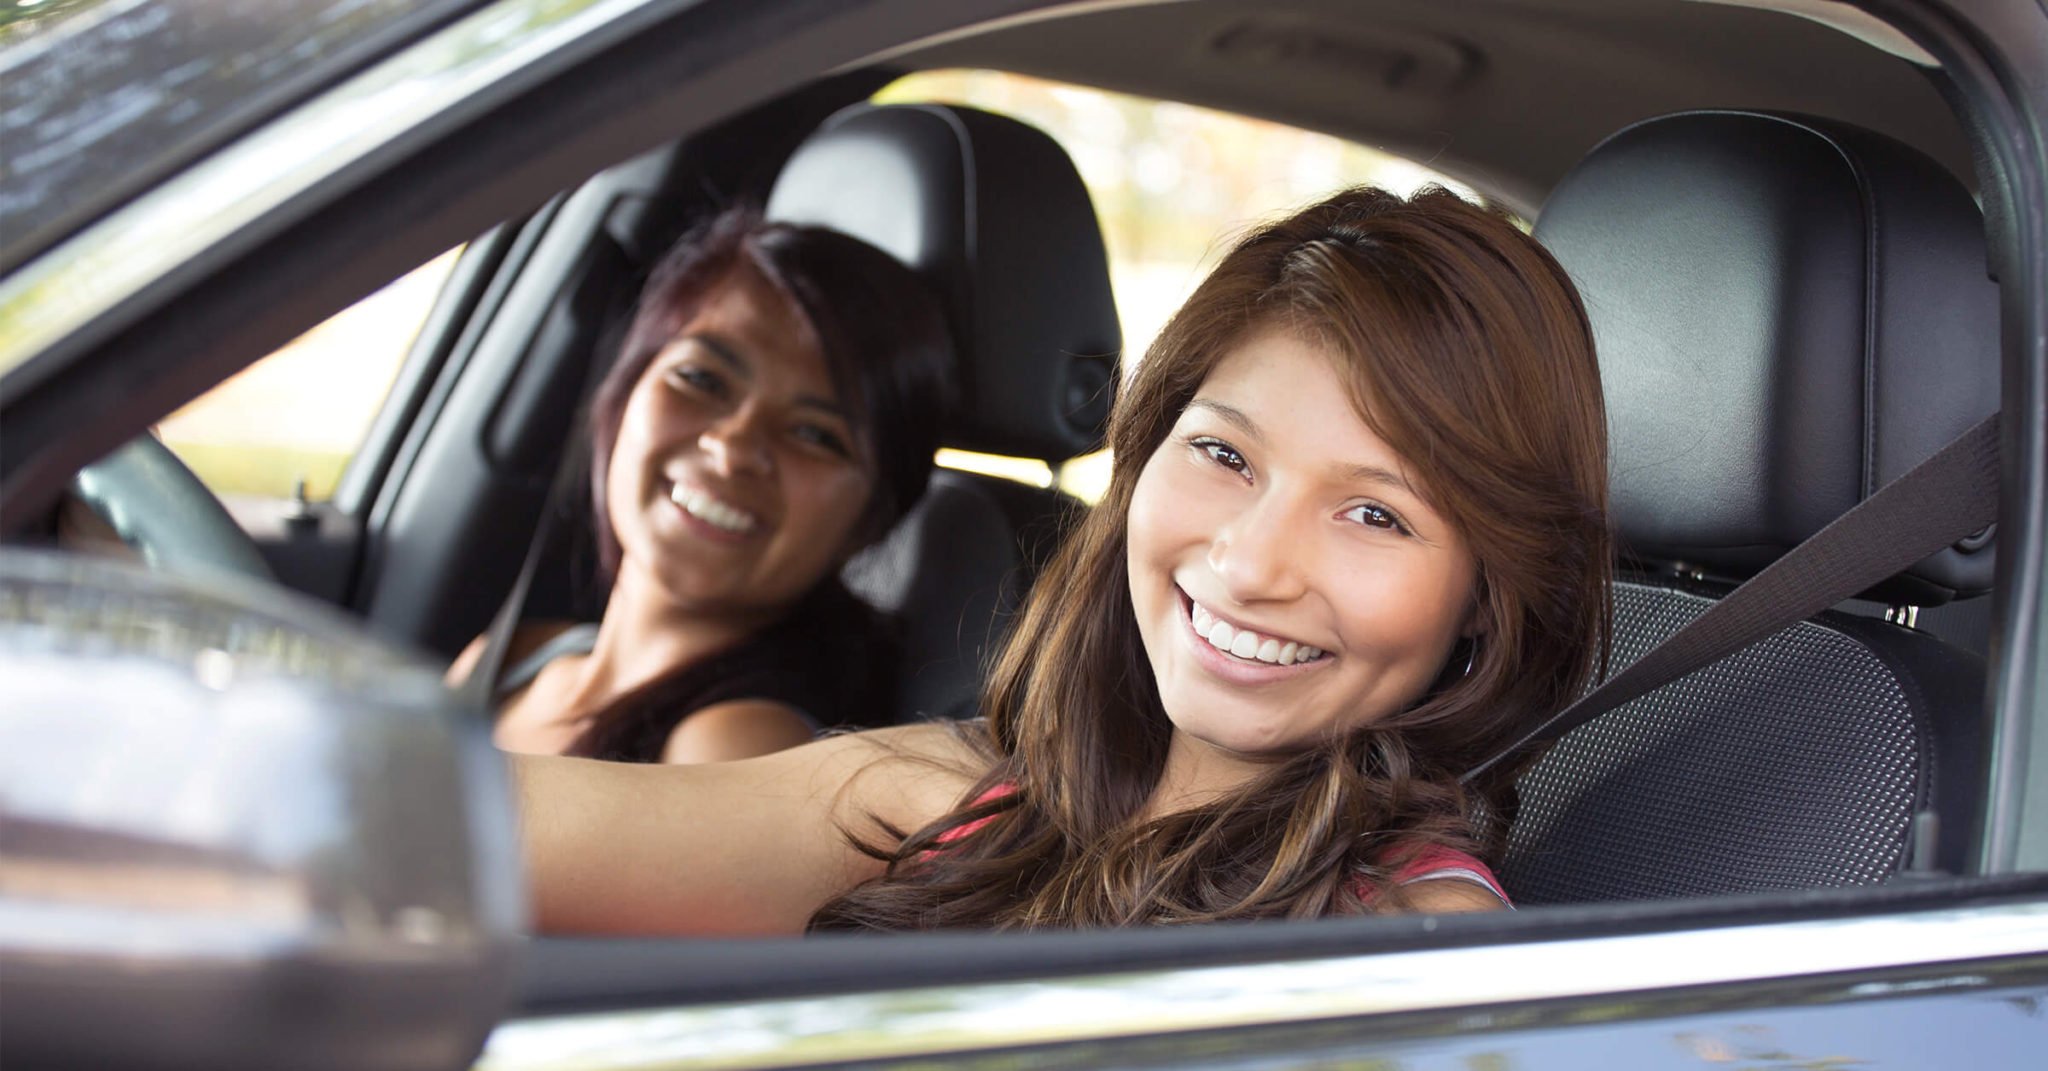 What is the best way to handle teen drivers and auto insurance? They ...